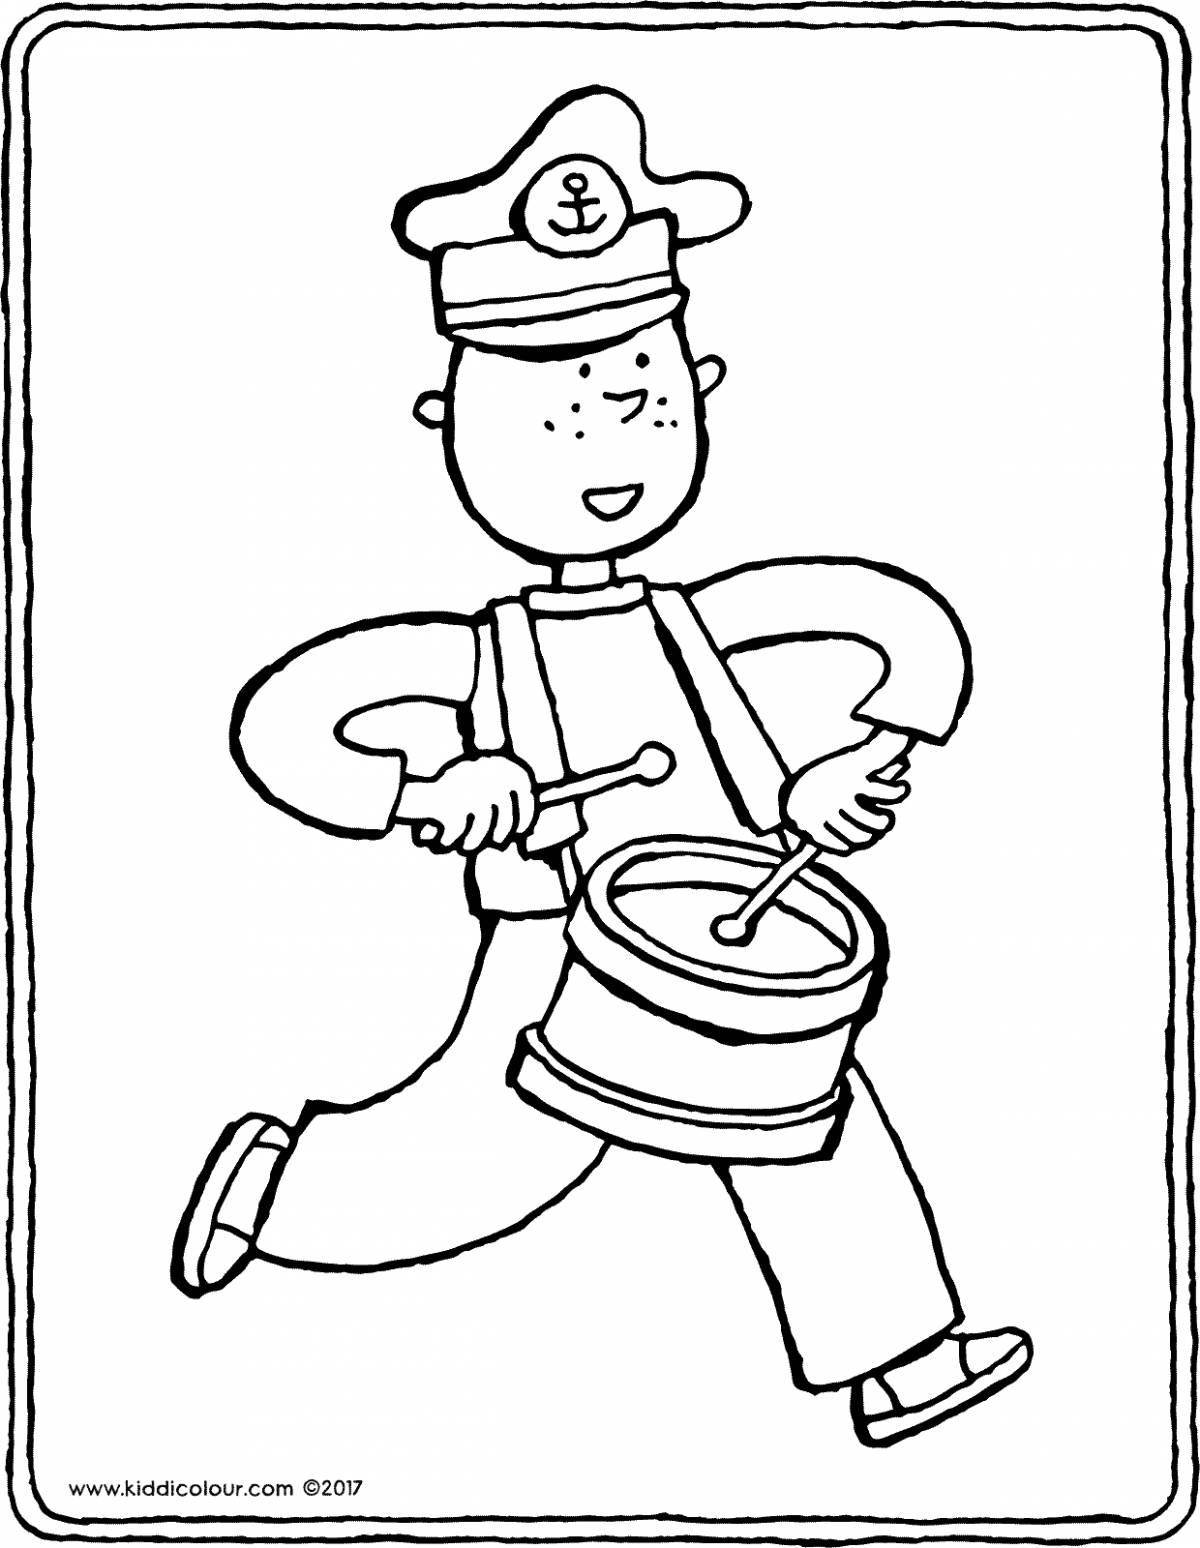 Merry March coloring page